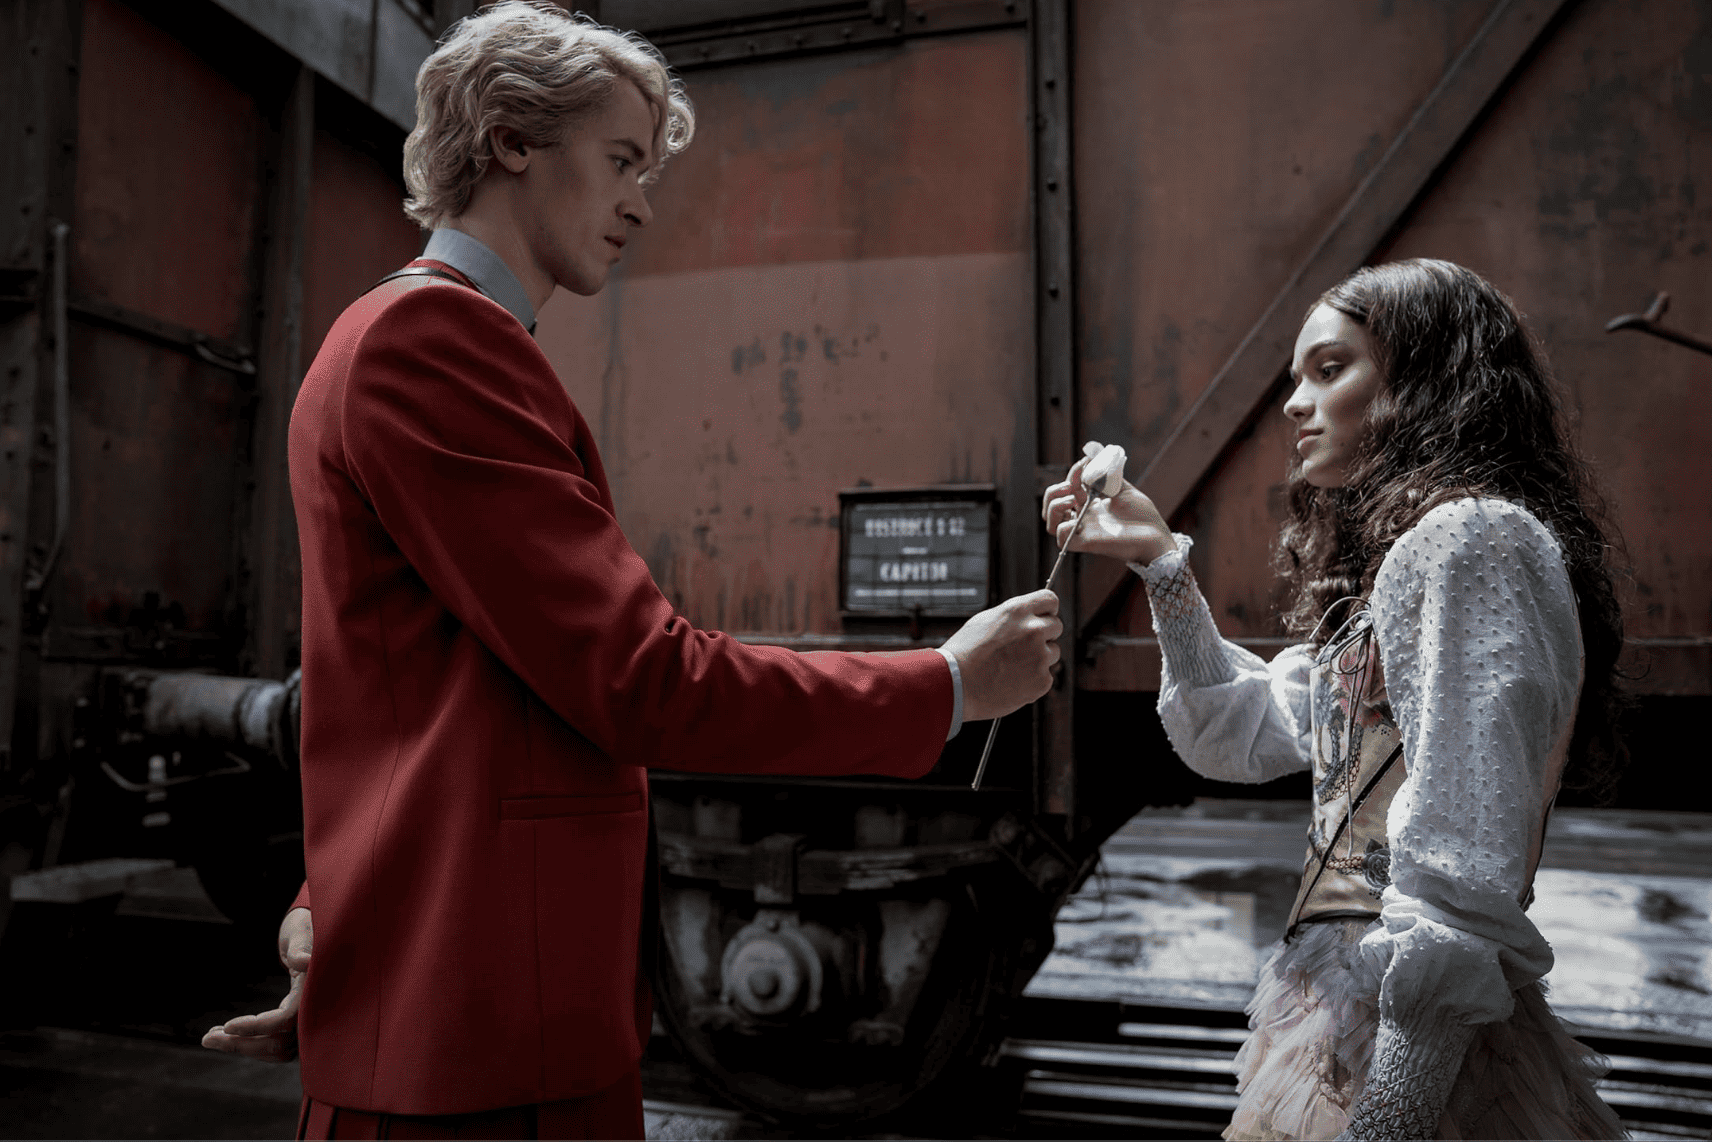 A man in a red suit gives a white rose to a girl in this image from Lionsgate Films.